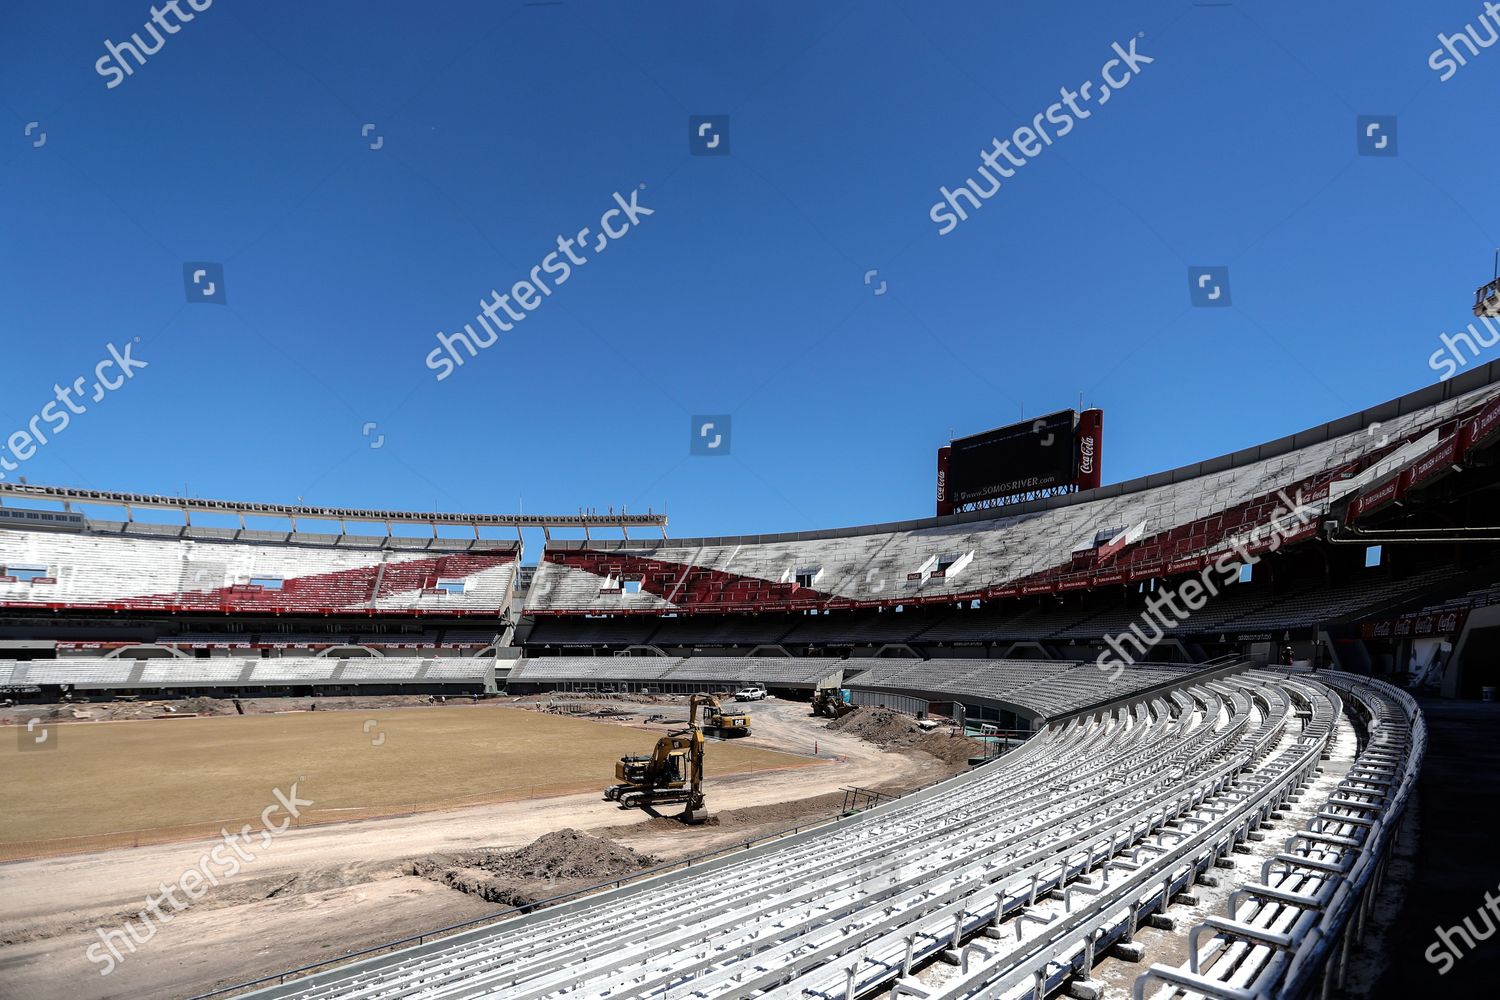 River Plate New Stadium / Argentina S River Plate Refuses To Play Match In Madrid Bloomberg / Celebration of one of argentina's visit the home stadium of river plate, which opened in the late 1930s and hosted the fifa world cup in 1978.